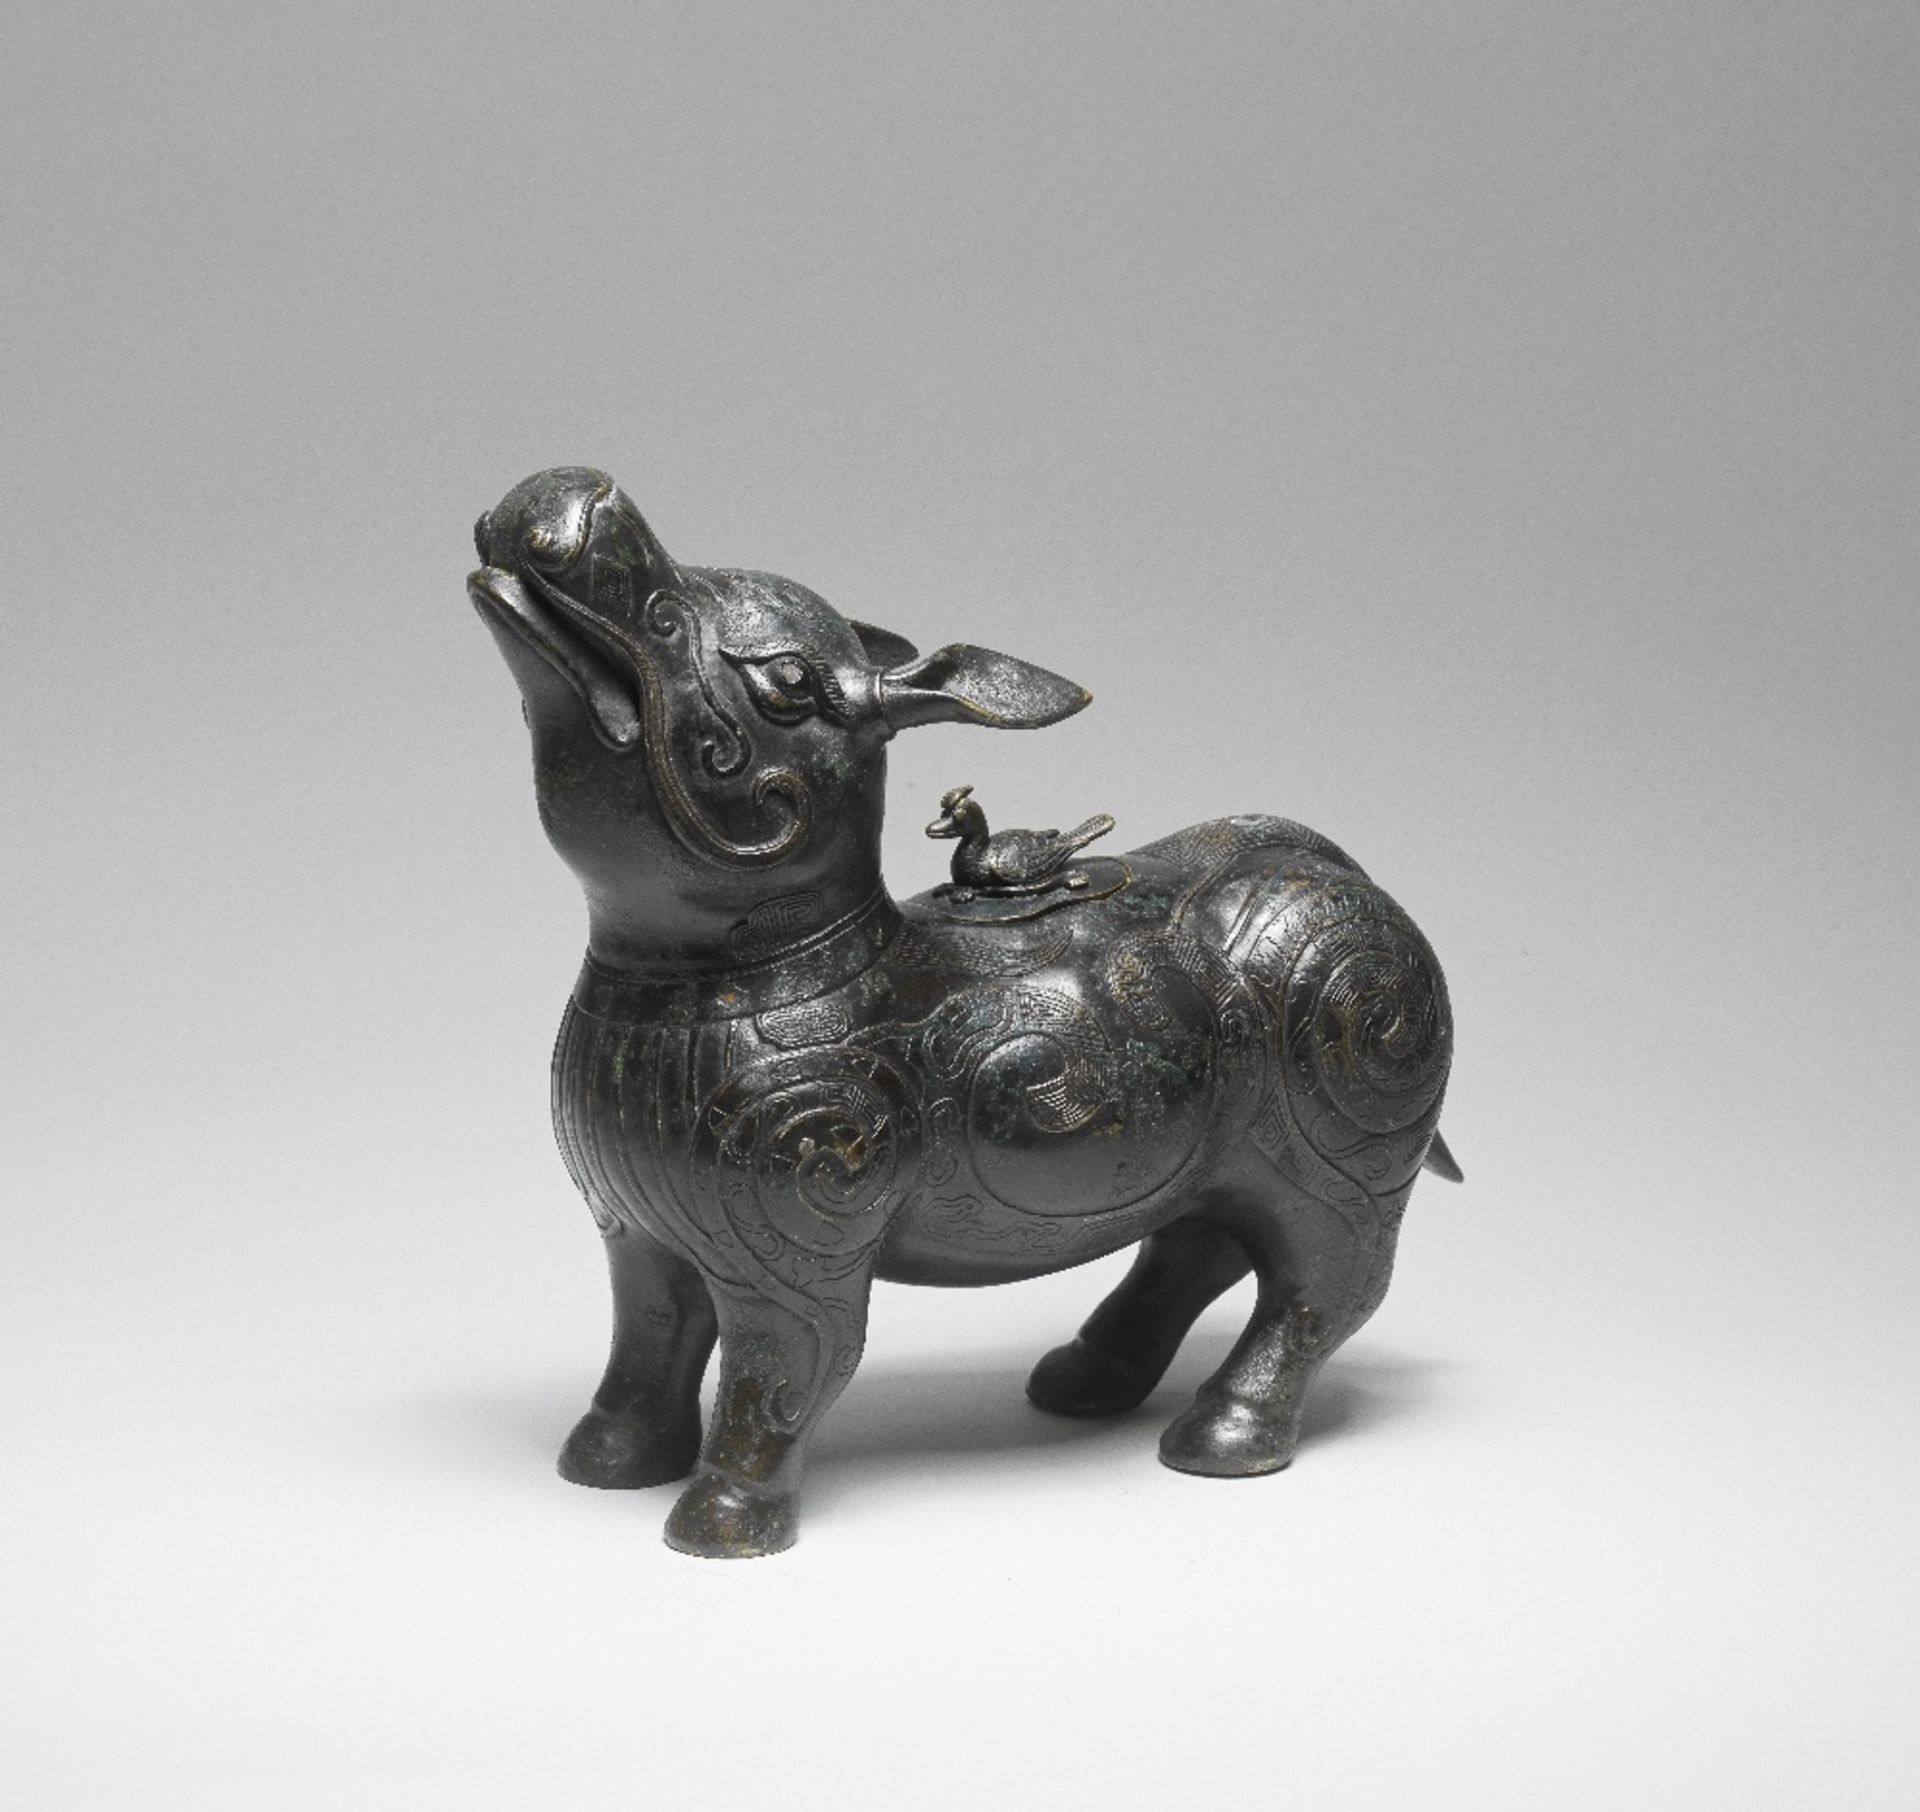 A RARE GOLD AND SILVER-INLAID BRONZE TAPIR-SHAPED VESSEL AND COVER, XIZUN Ming/early Qing Dynasty...